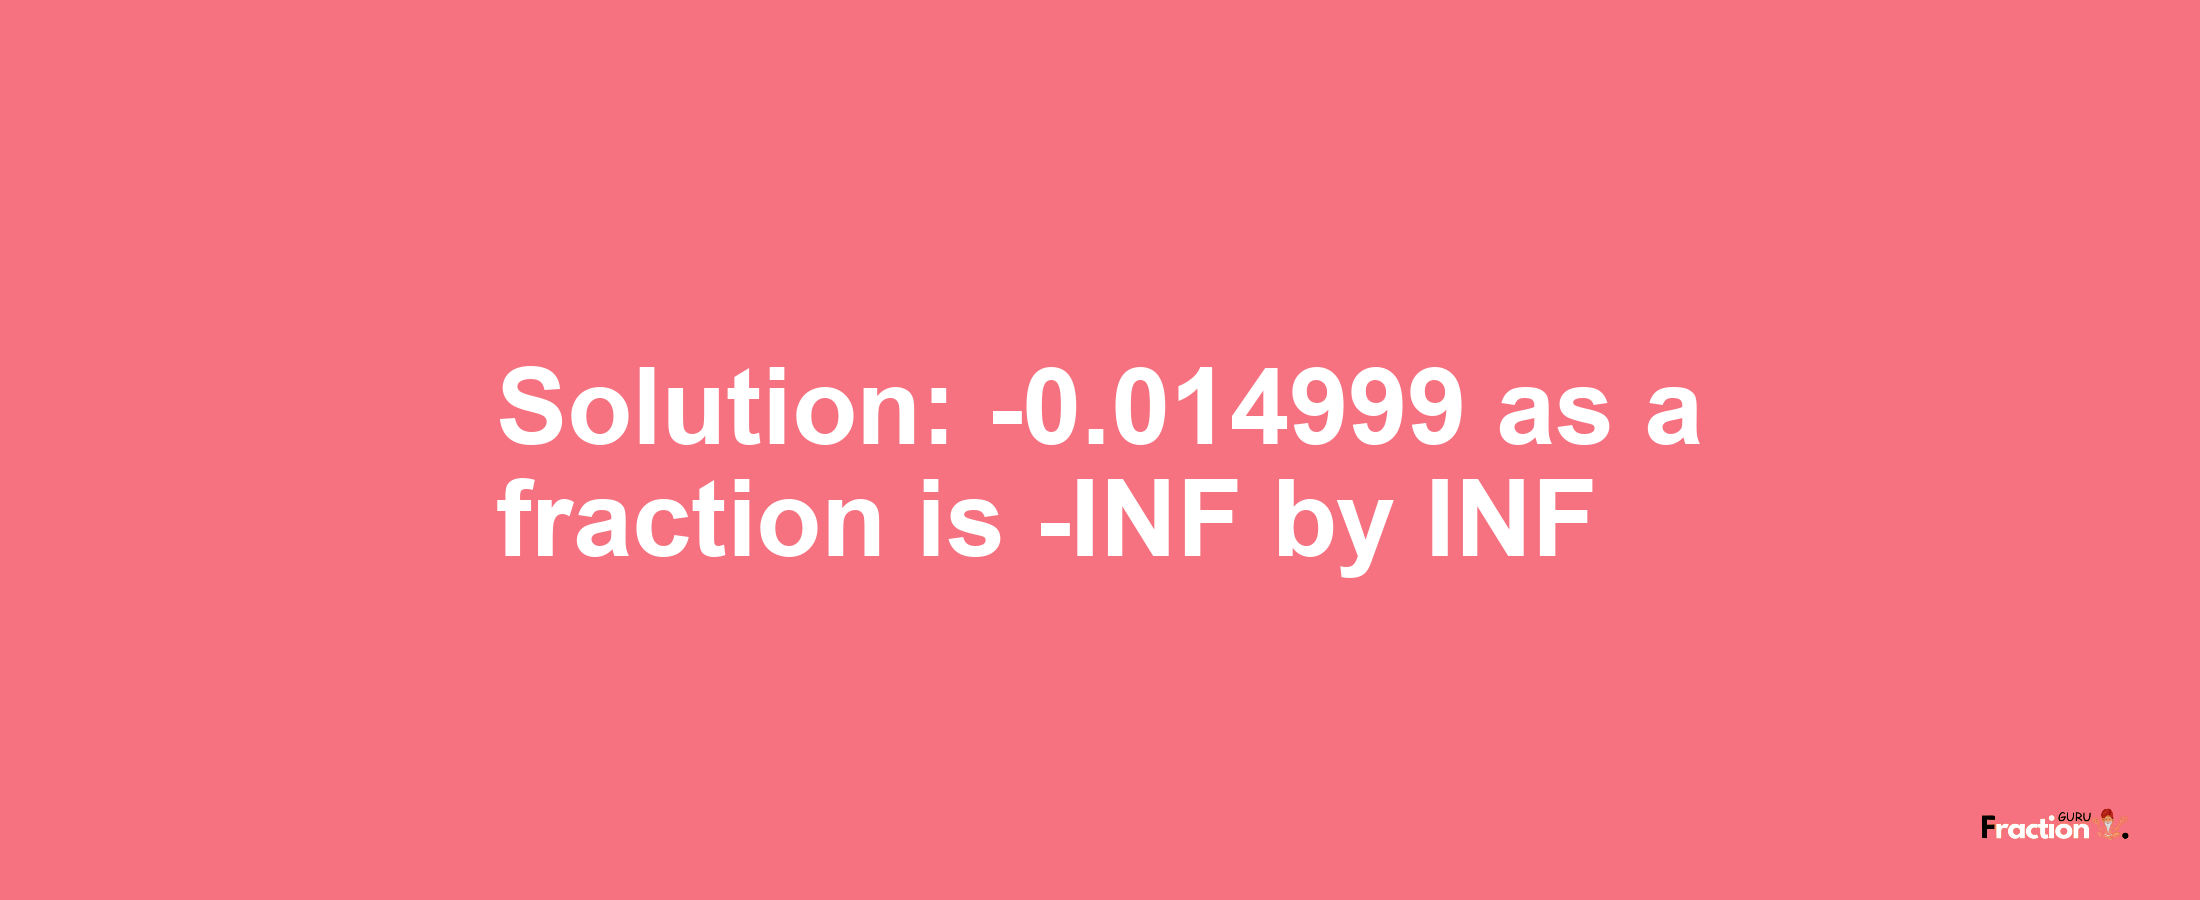 Solution:-0.014999 as a fraction is -INF/INF